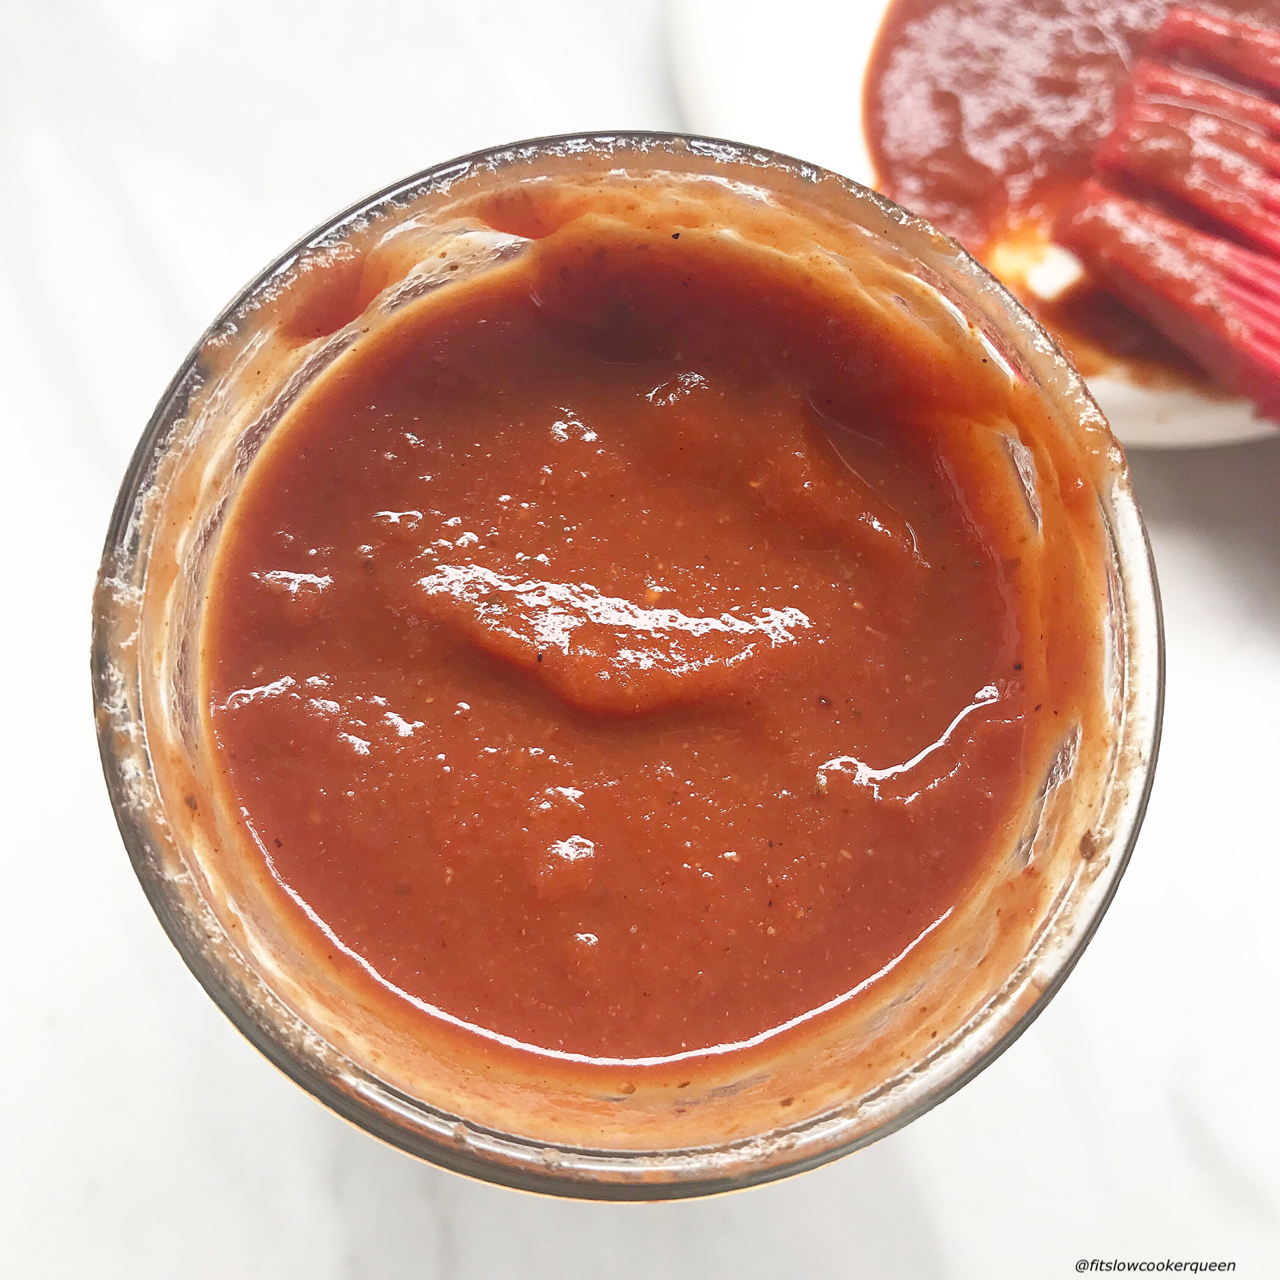 This tangy, homemade slow cooker BBQ sauce is sugar-free, gluten-free, whole30 compliant, and paleo but still packed with flavor.